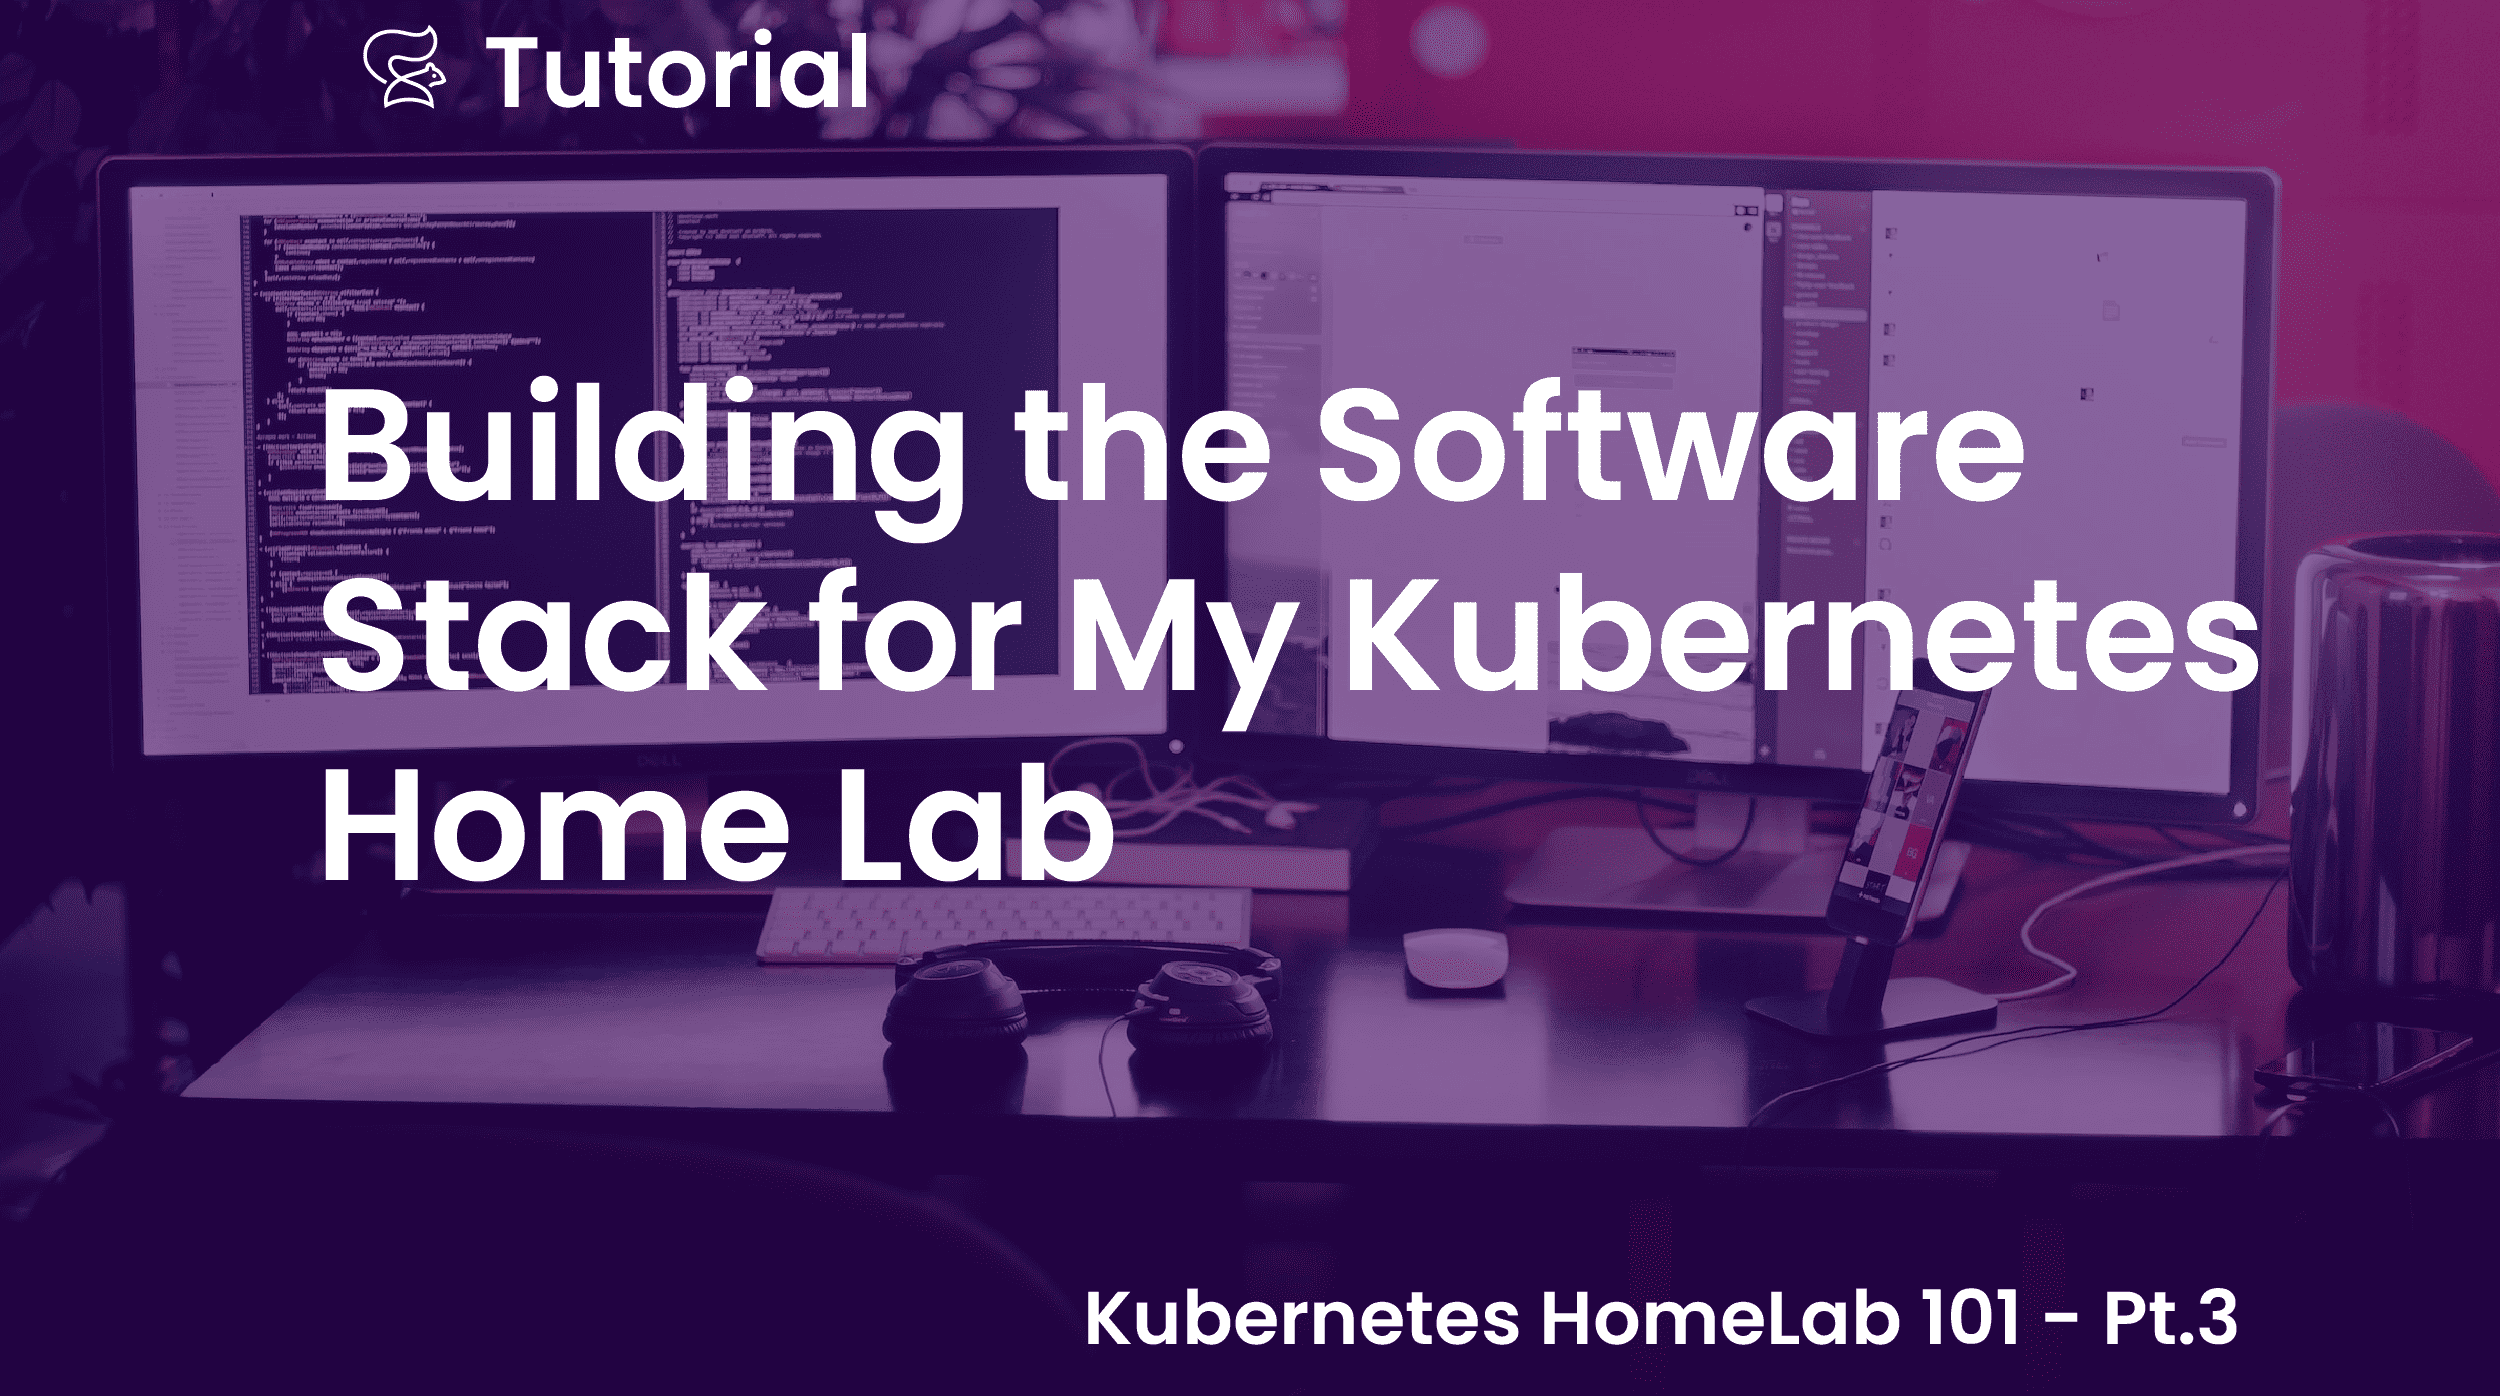 Building the Software Stack for My Kubernetes Home Lab